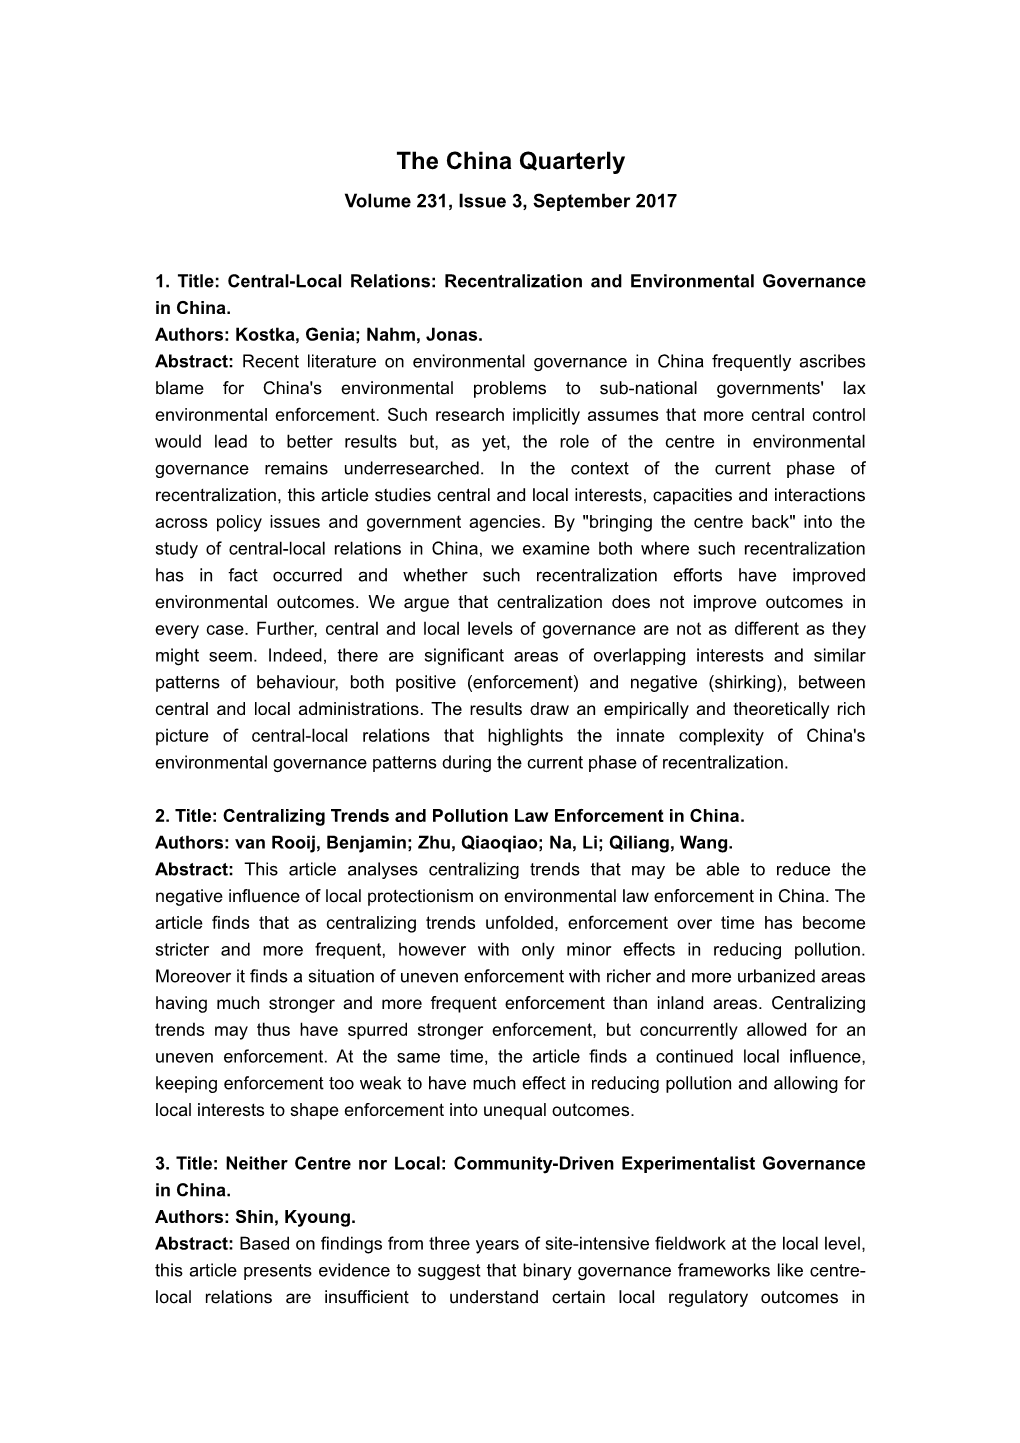 1. Title: Central-Local Relations: Recentralization and Environmental Governance in China